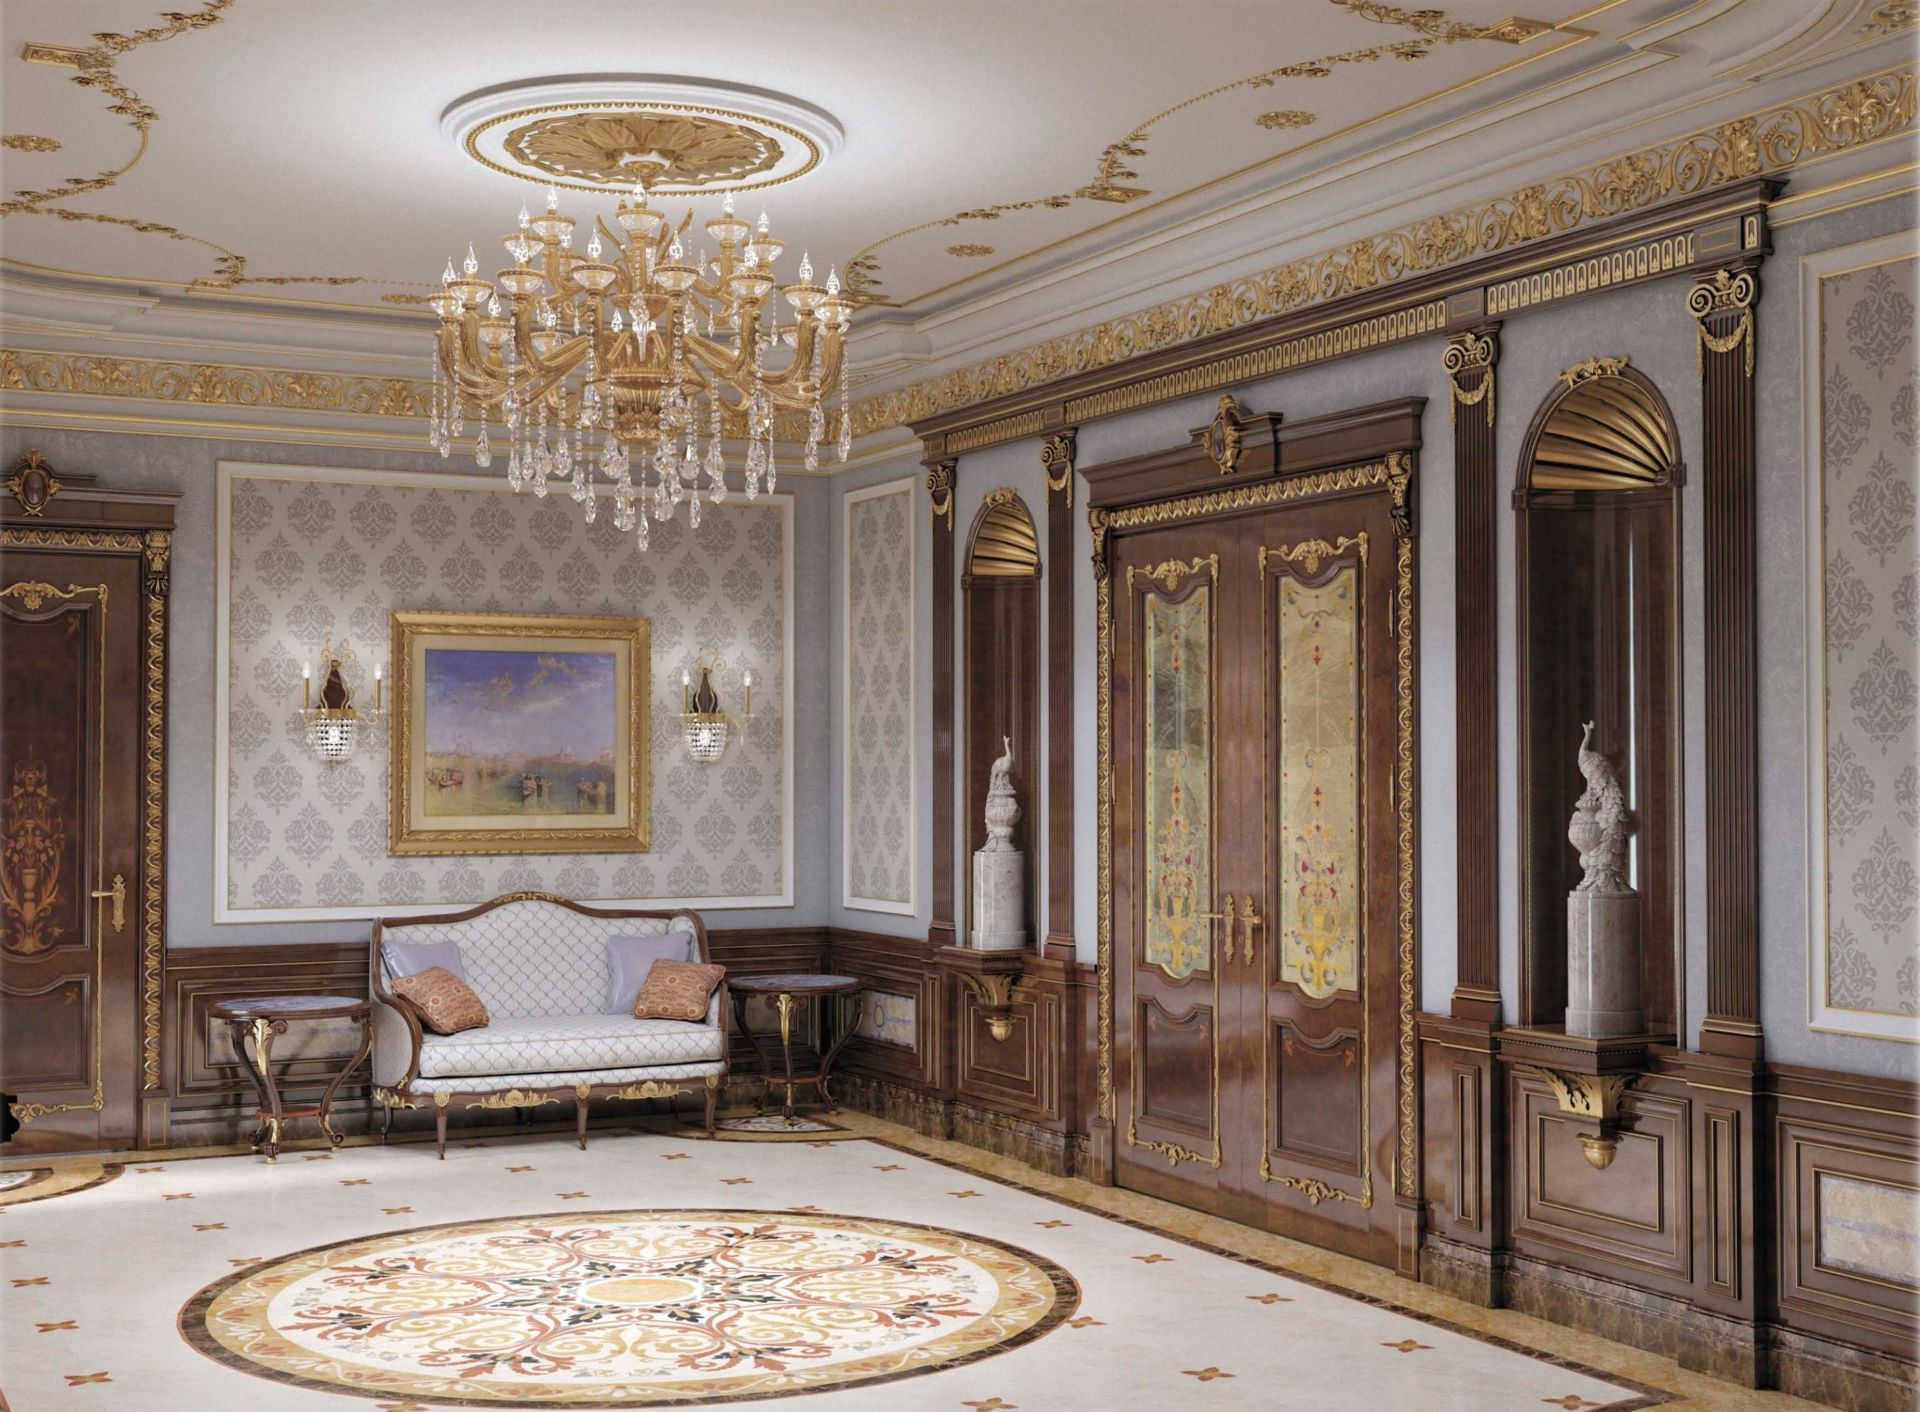 Hall interior design with a marble floor